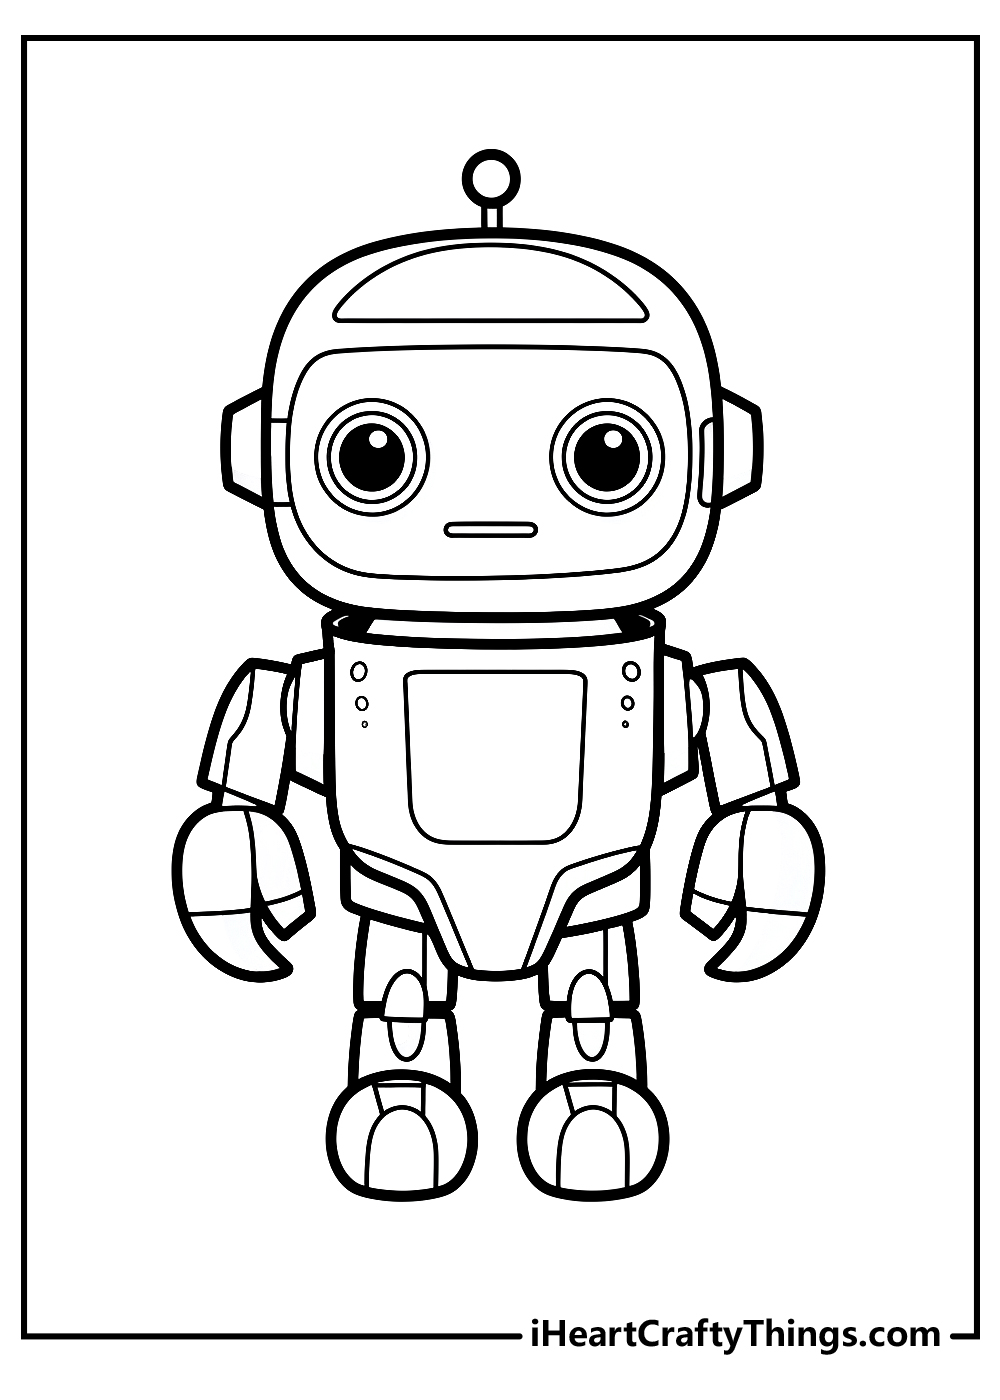 25 Free Printable Coloring Pages and Activities